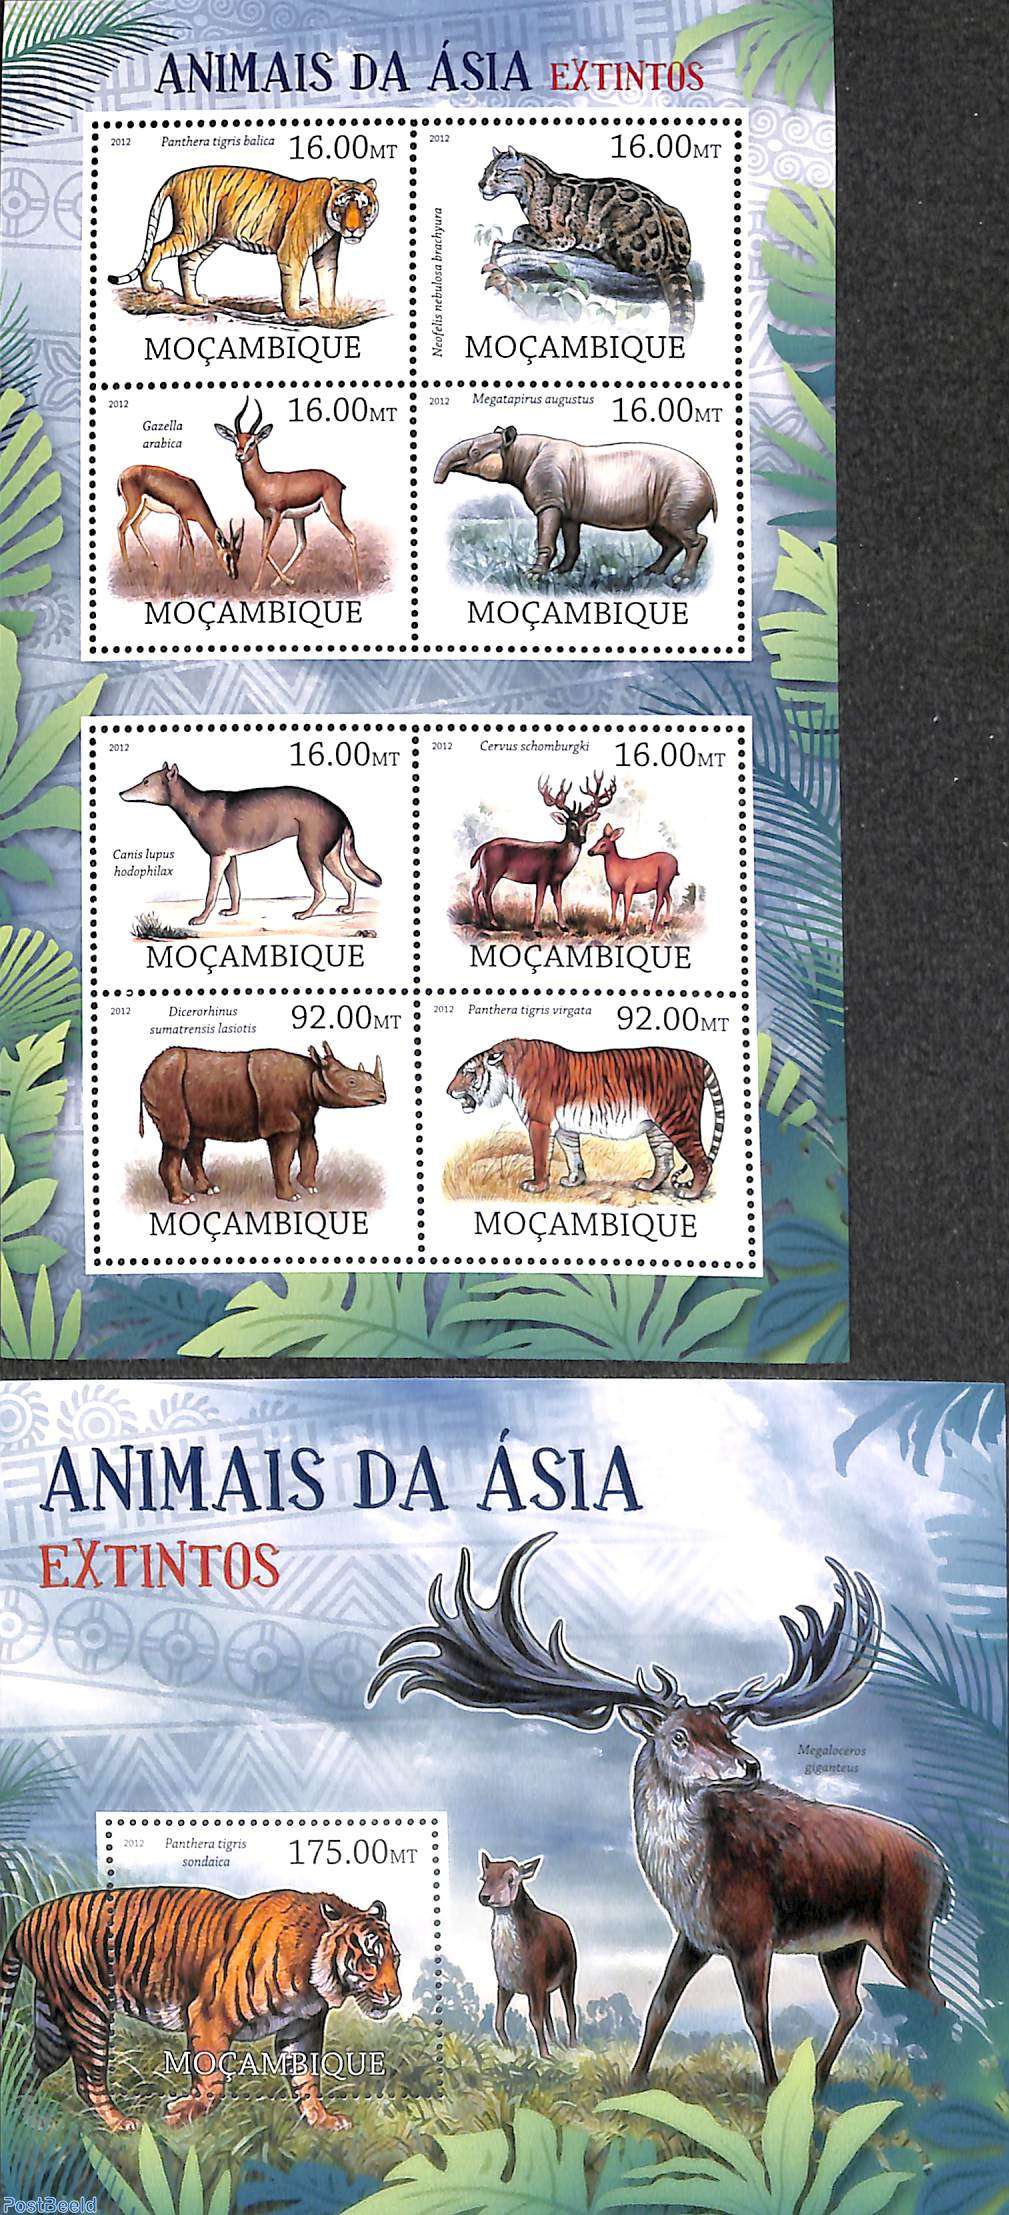 Stamp 2012, Mozambique Asian extinct animals 2 s/s, 2012 - Collecting  Stamps - PostBeeld - Online Stamp Shop - Collecting